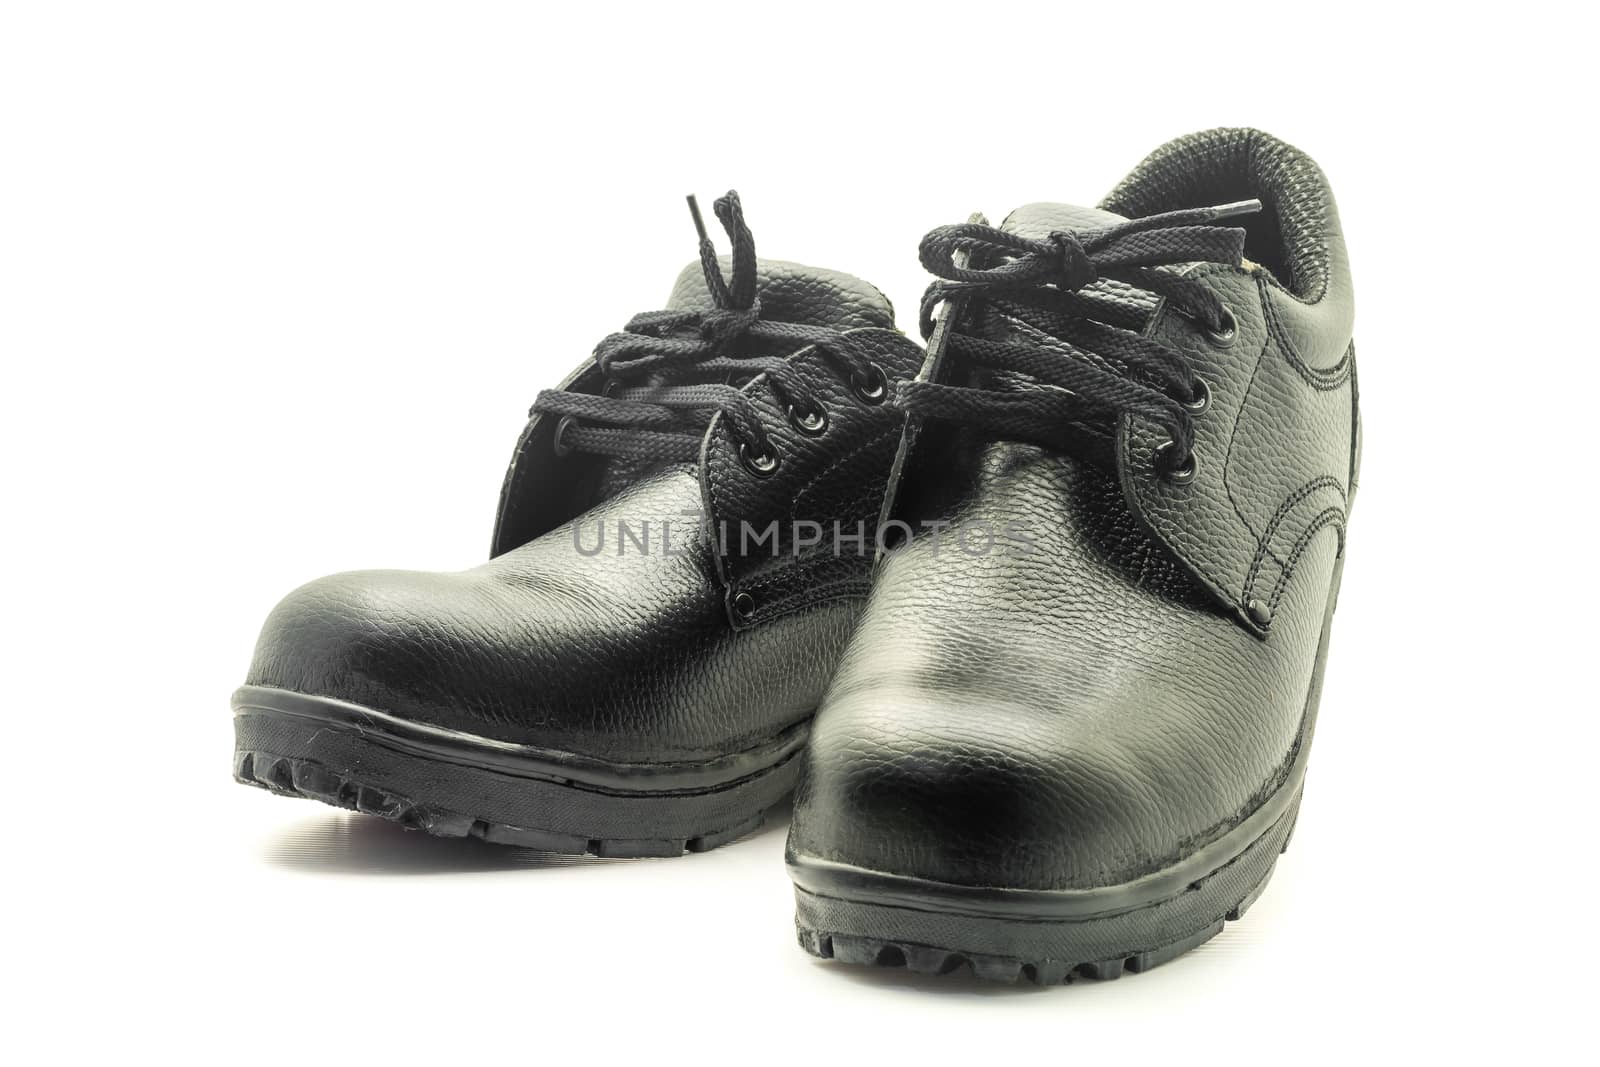 Protective workwear black safety shoes on white background.